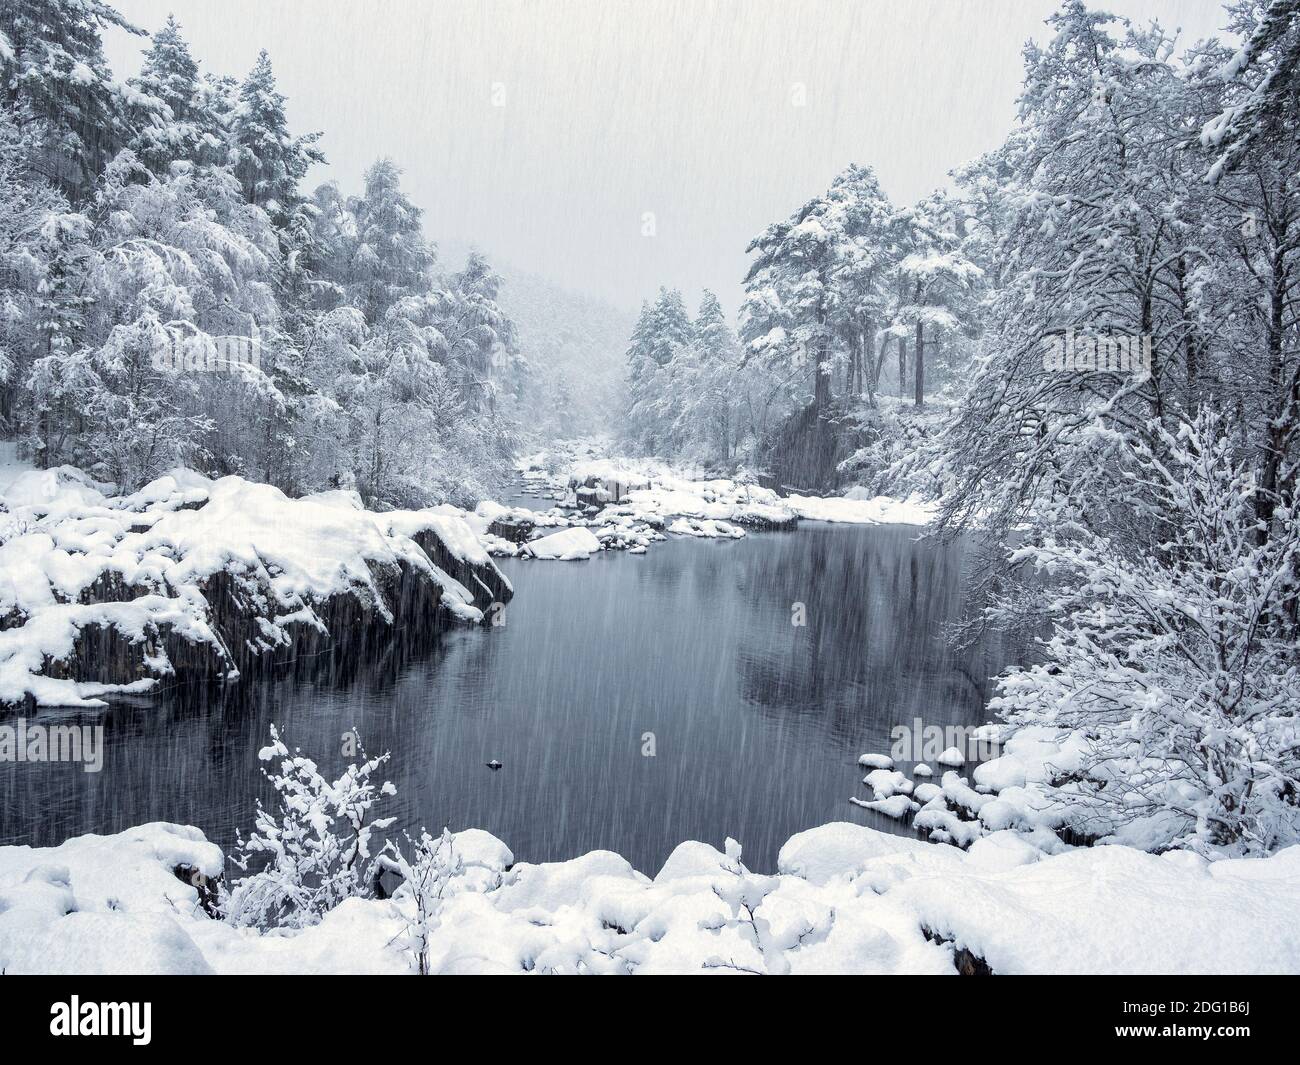 Snow falling by the River Affric near Dog Falls, Glen Affric, Scotland Stock Photo